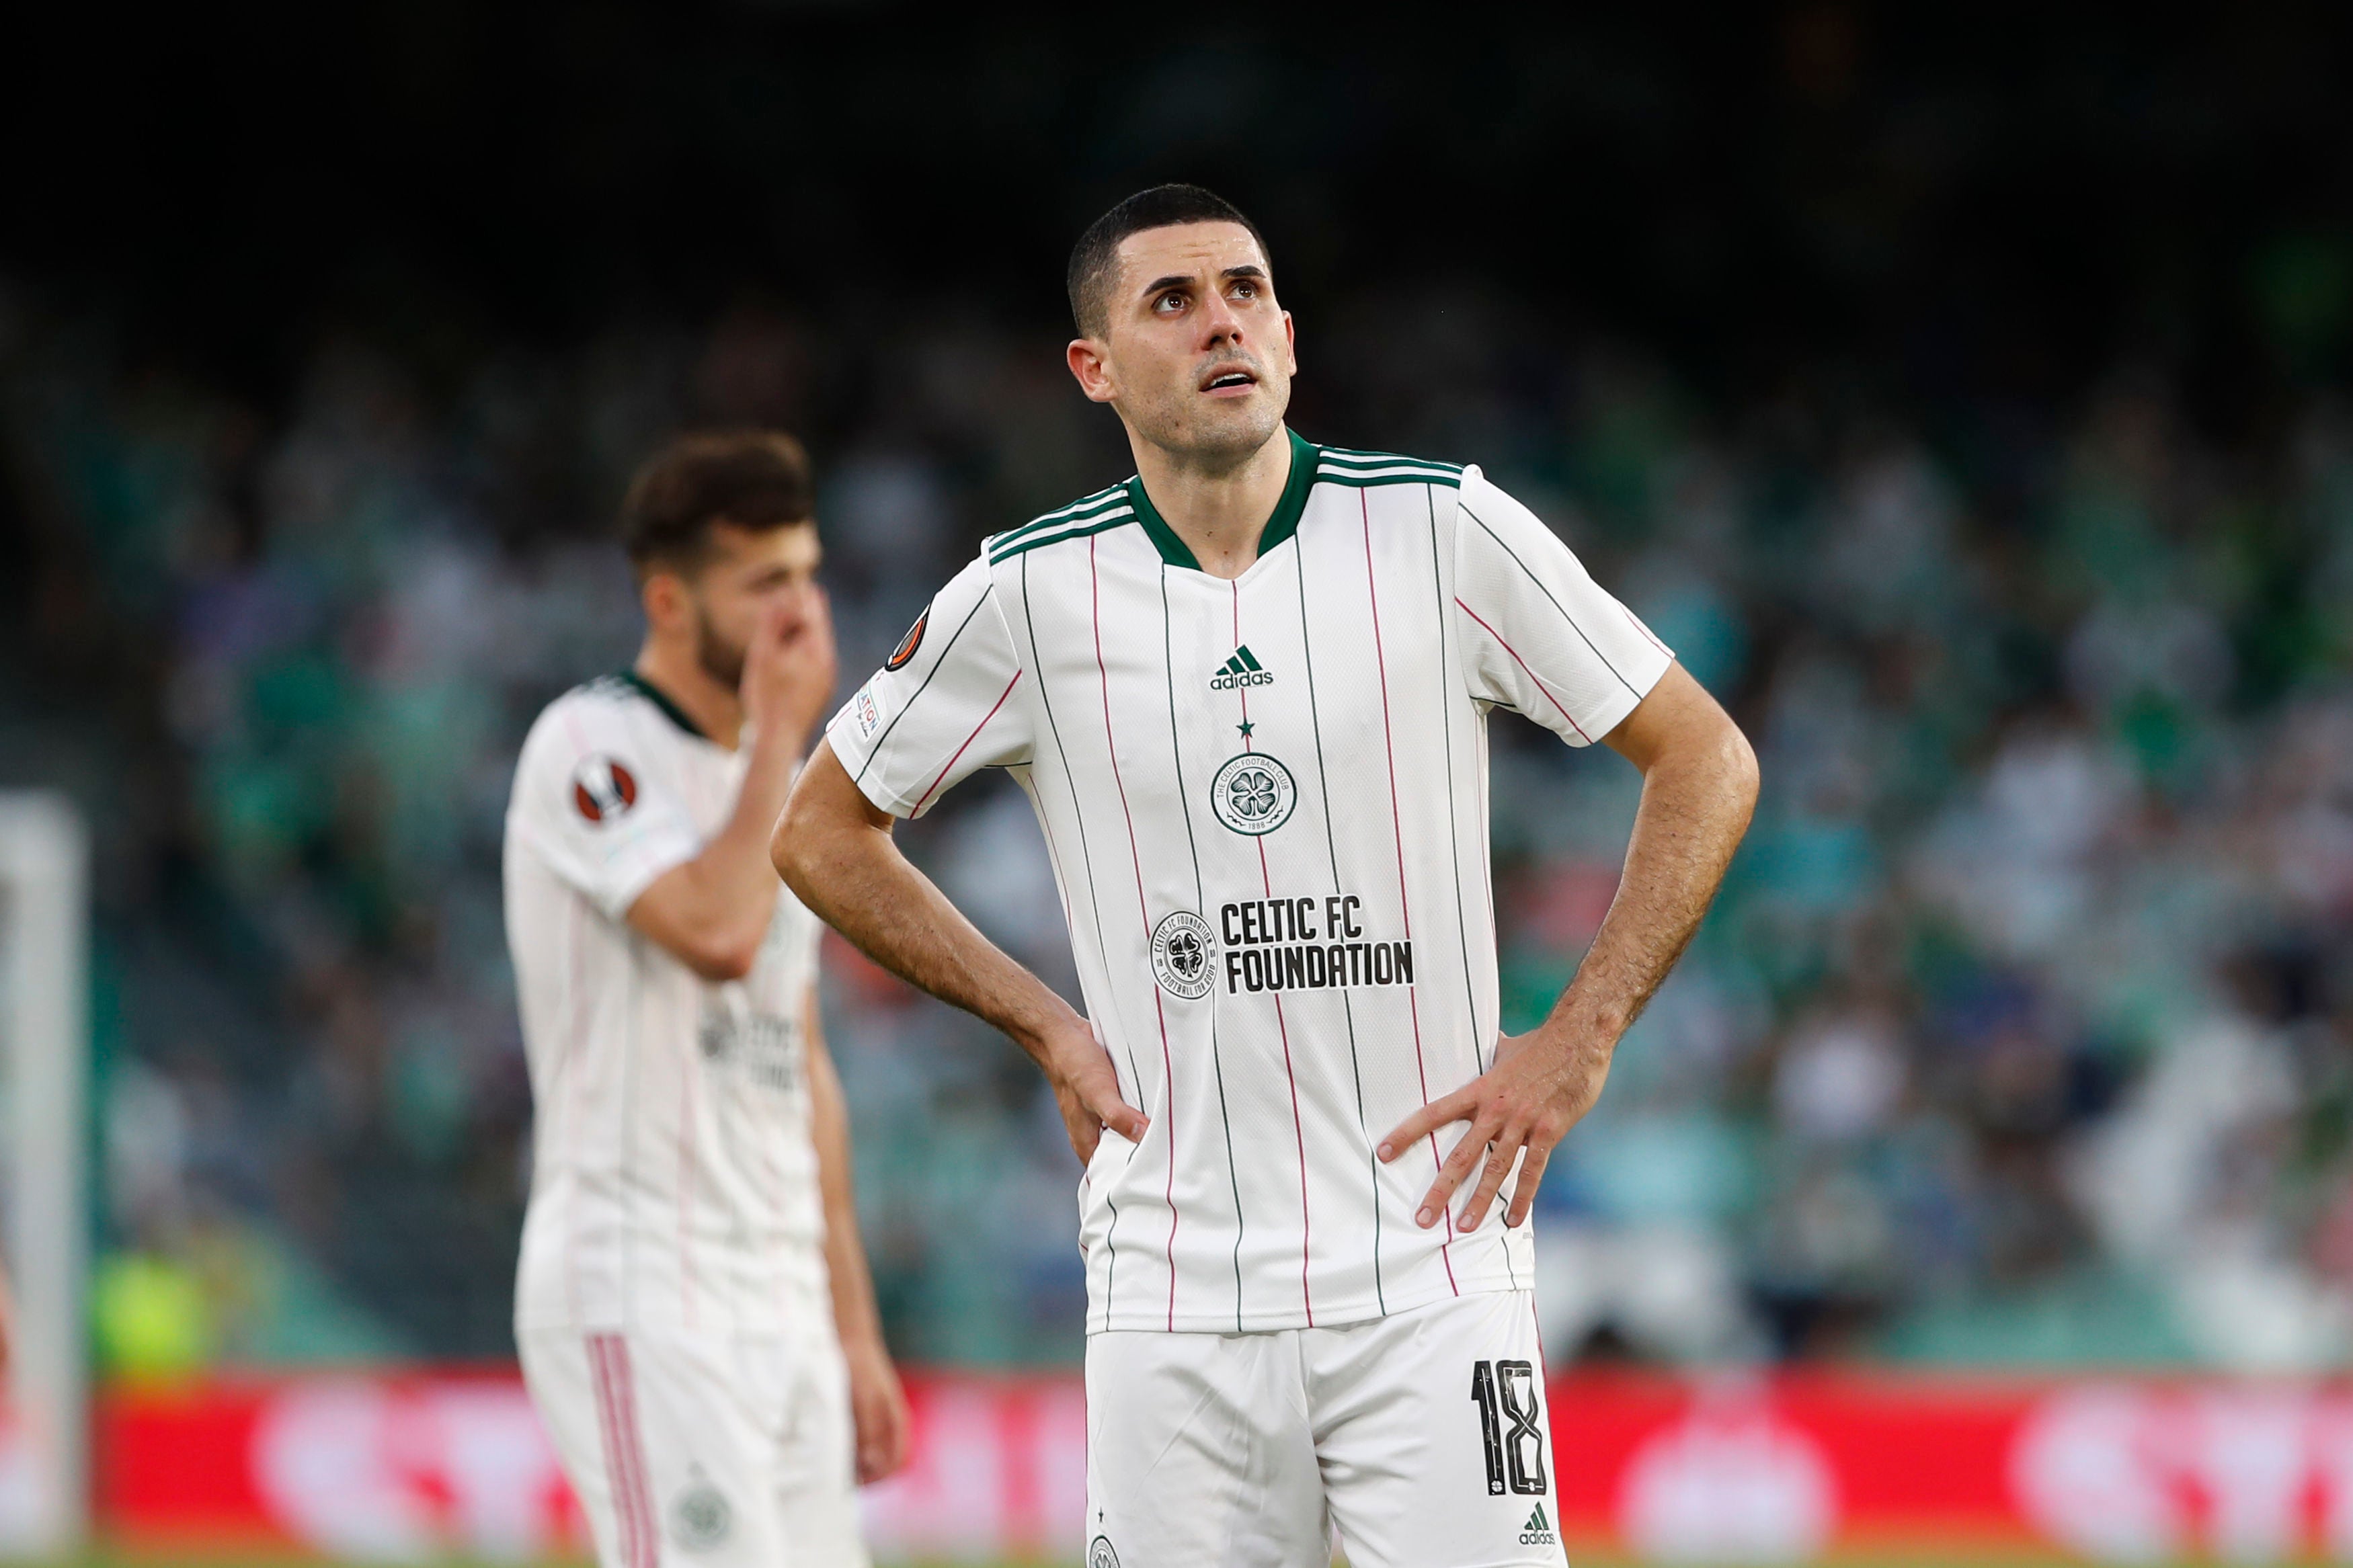 Celtic were beaten by Real Betis in the Europa League earlier this season (Miguel Morenatti/PA)